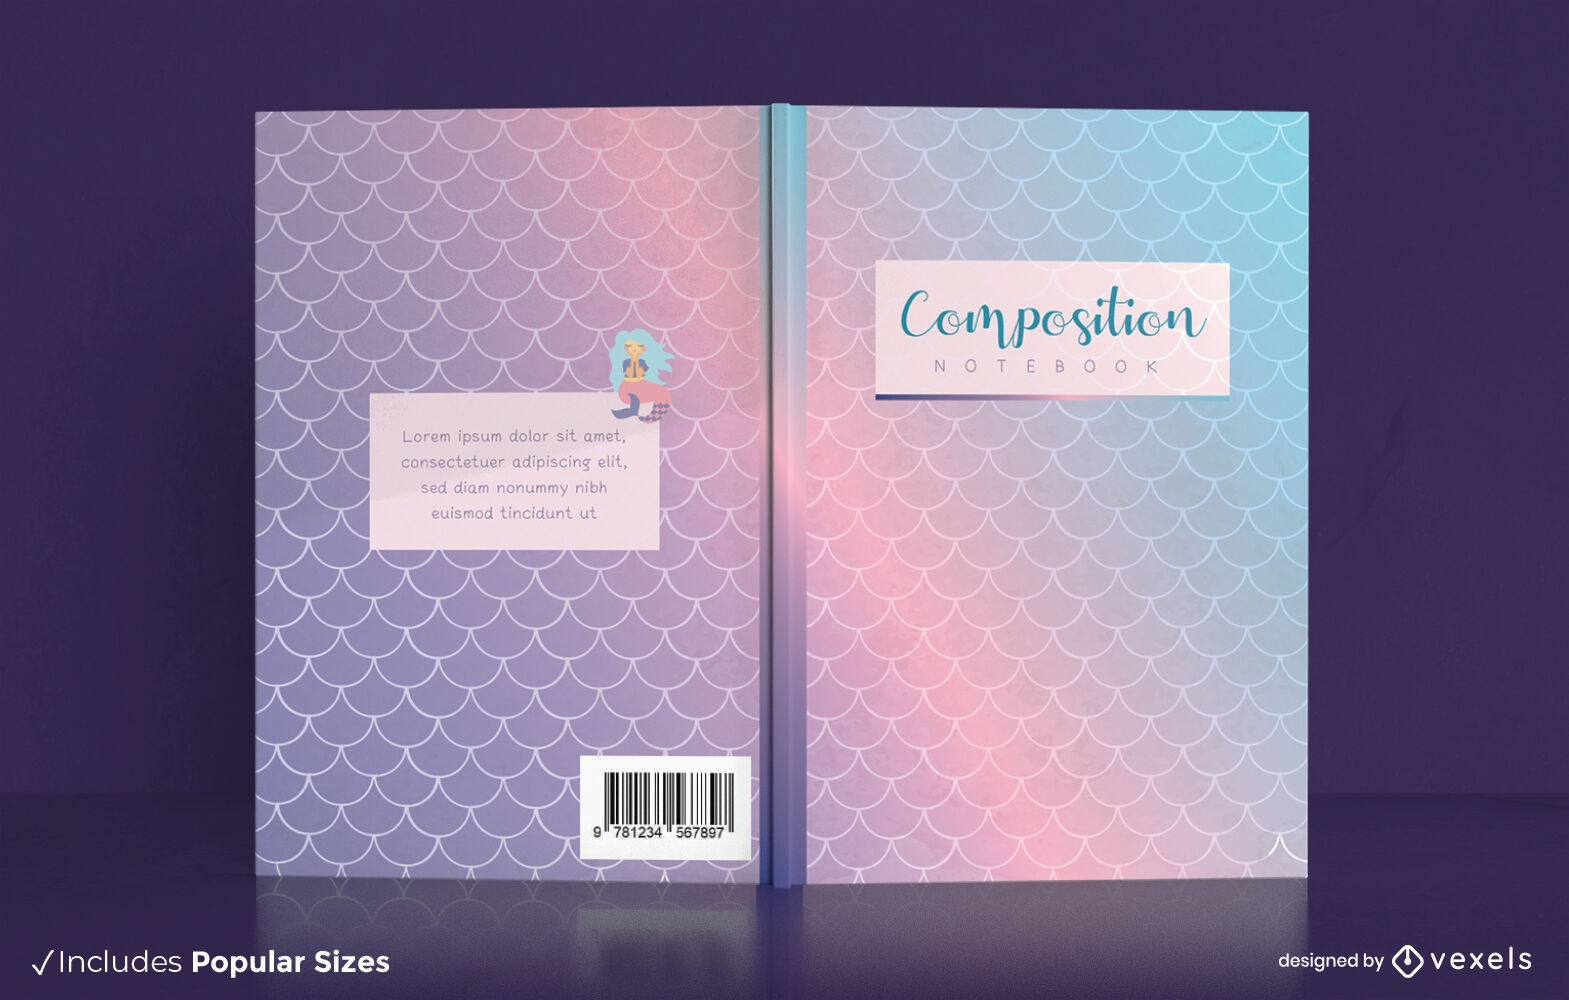 Mermaid tail holographic book cover design